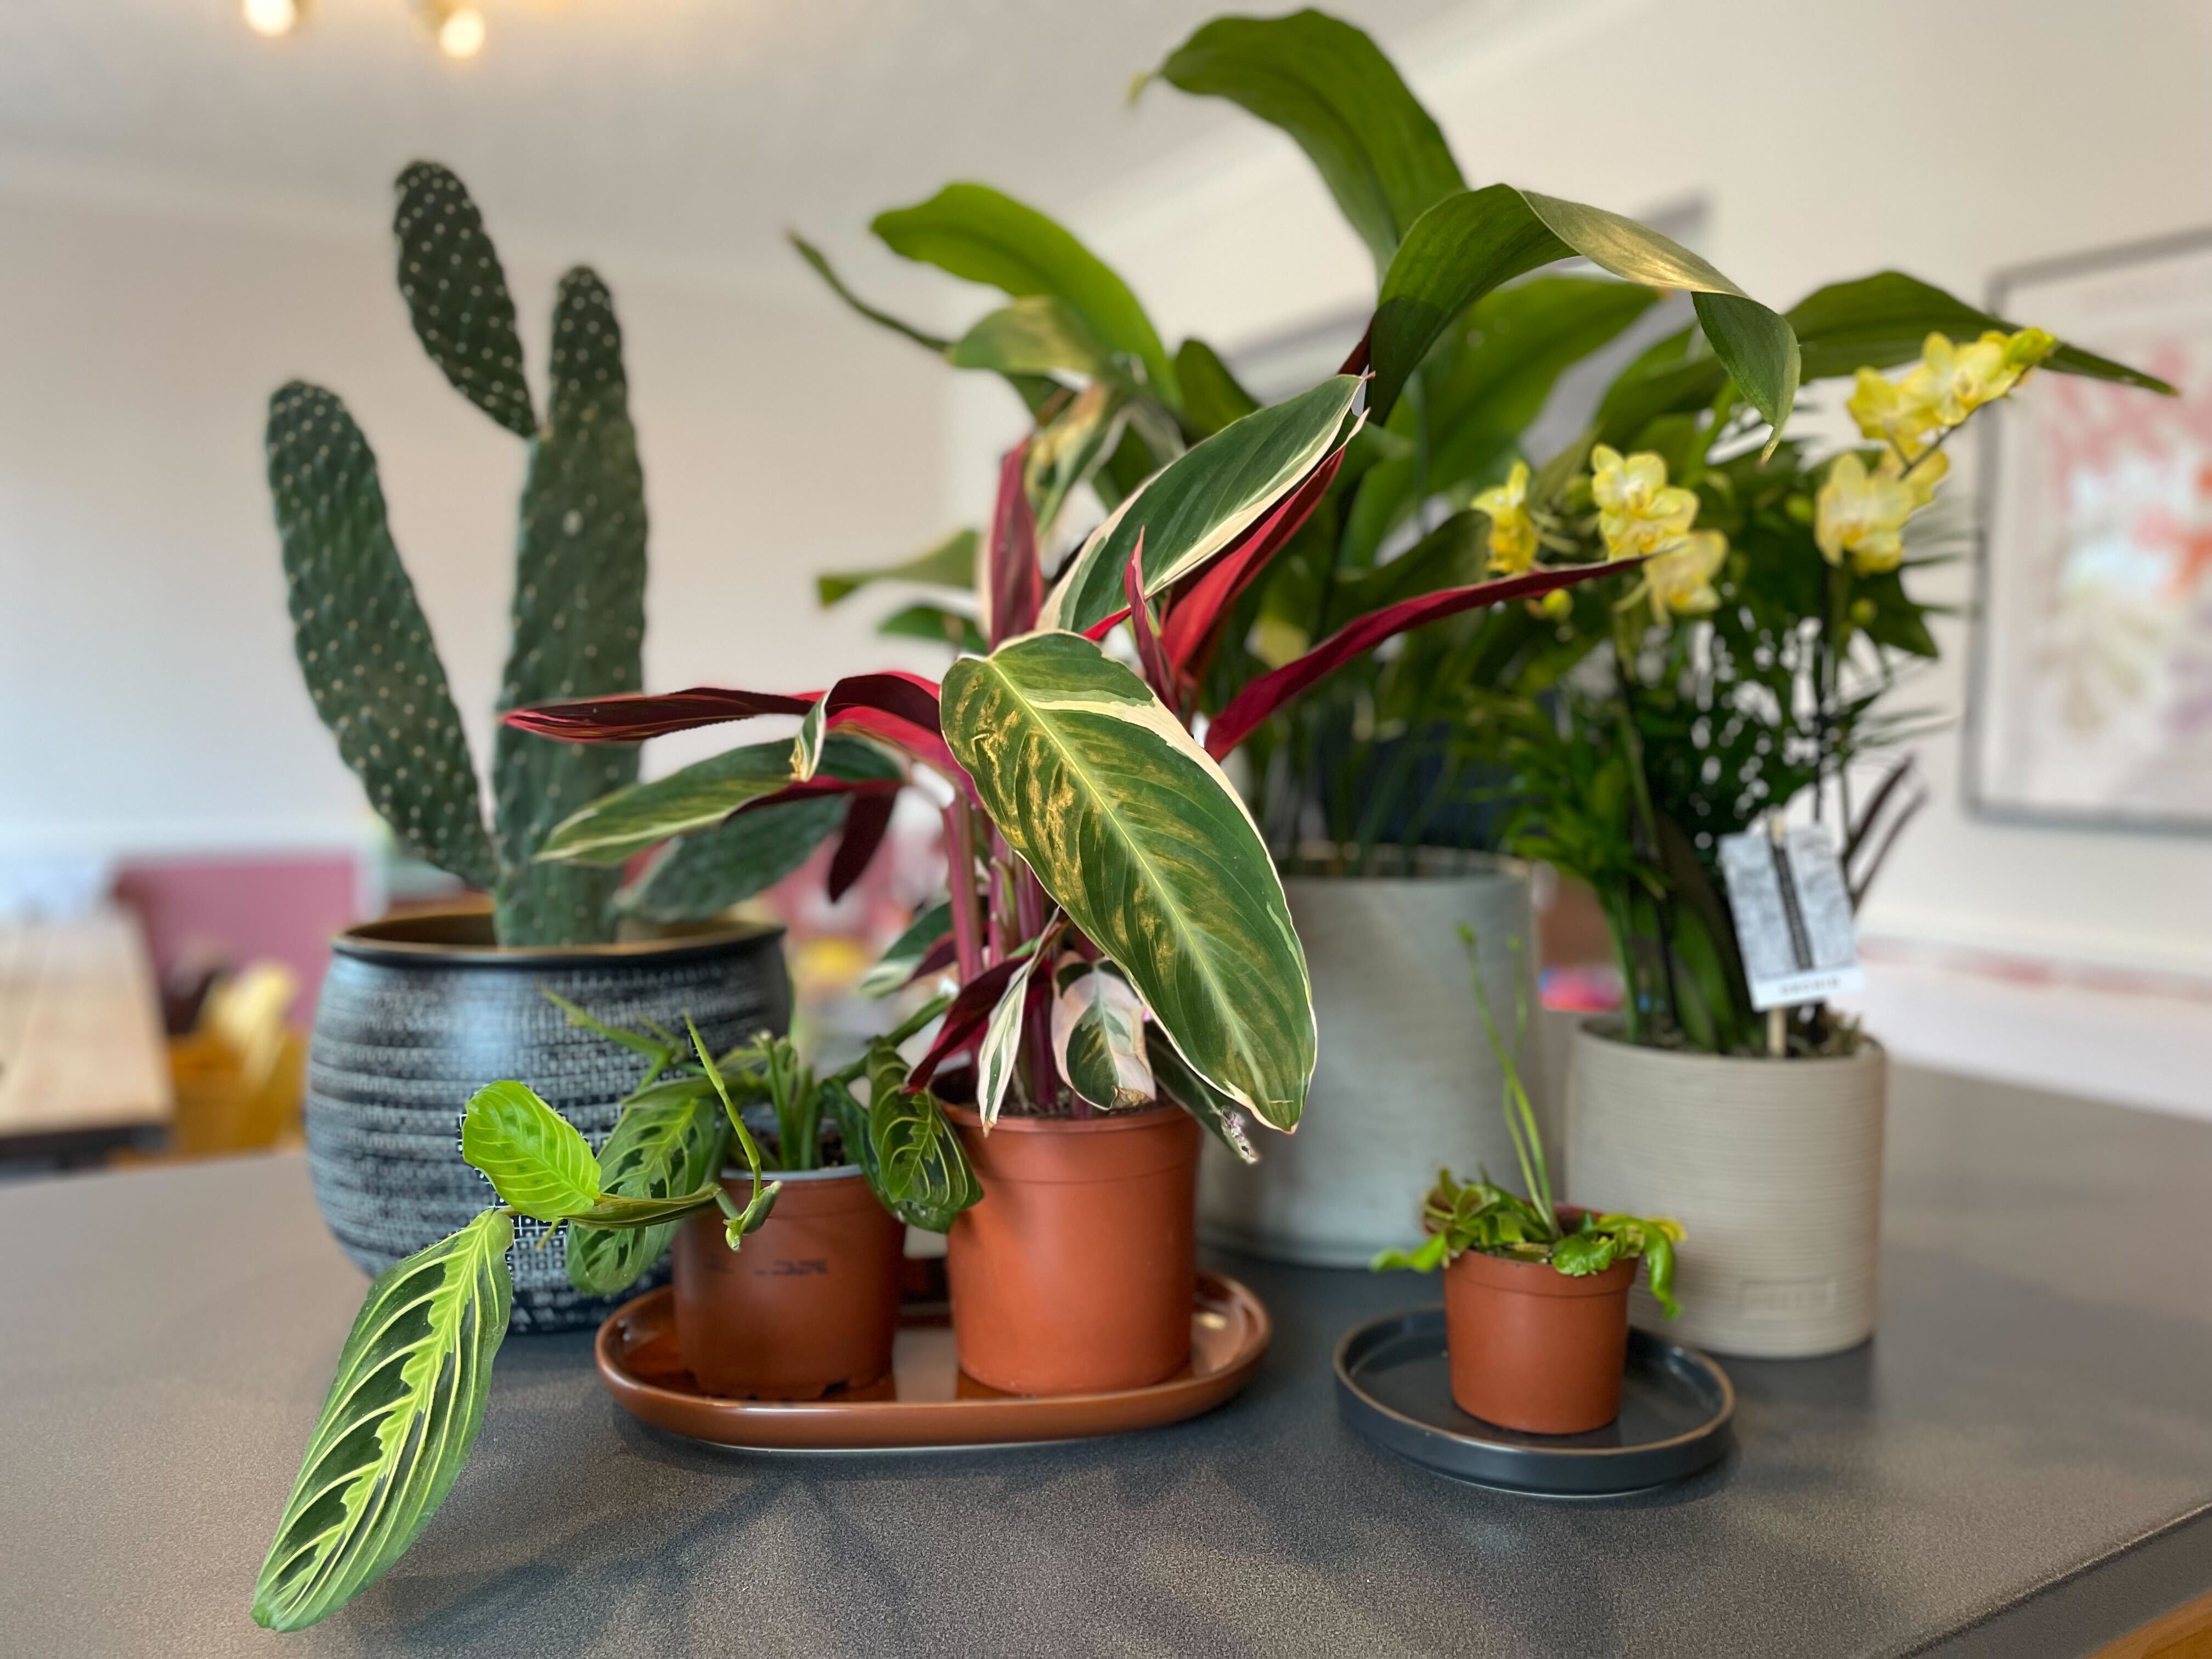 A selection of the best pet-friendly plants we tested for our review